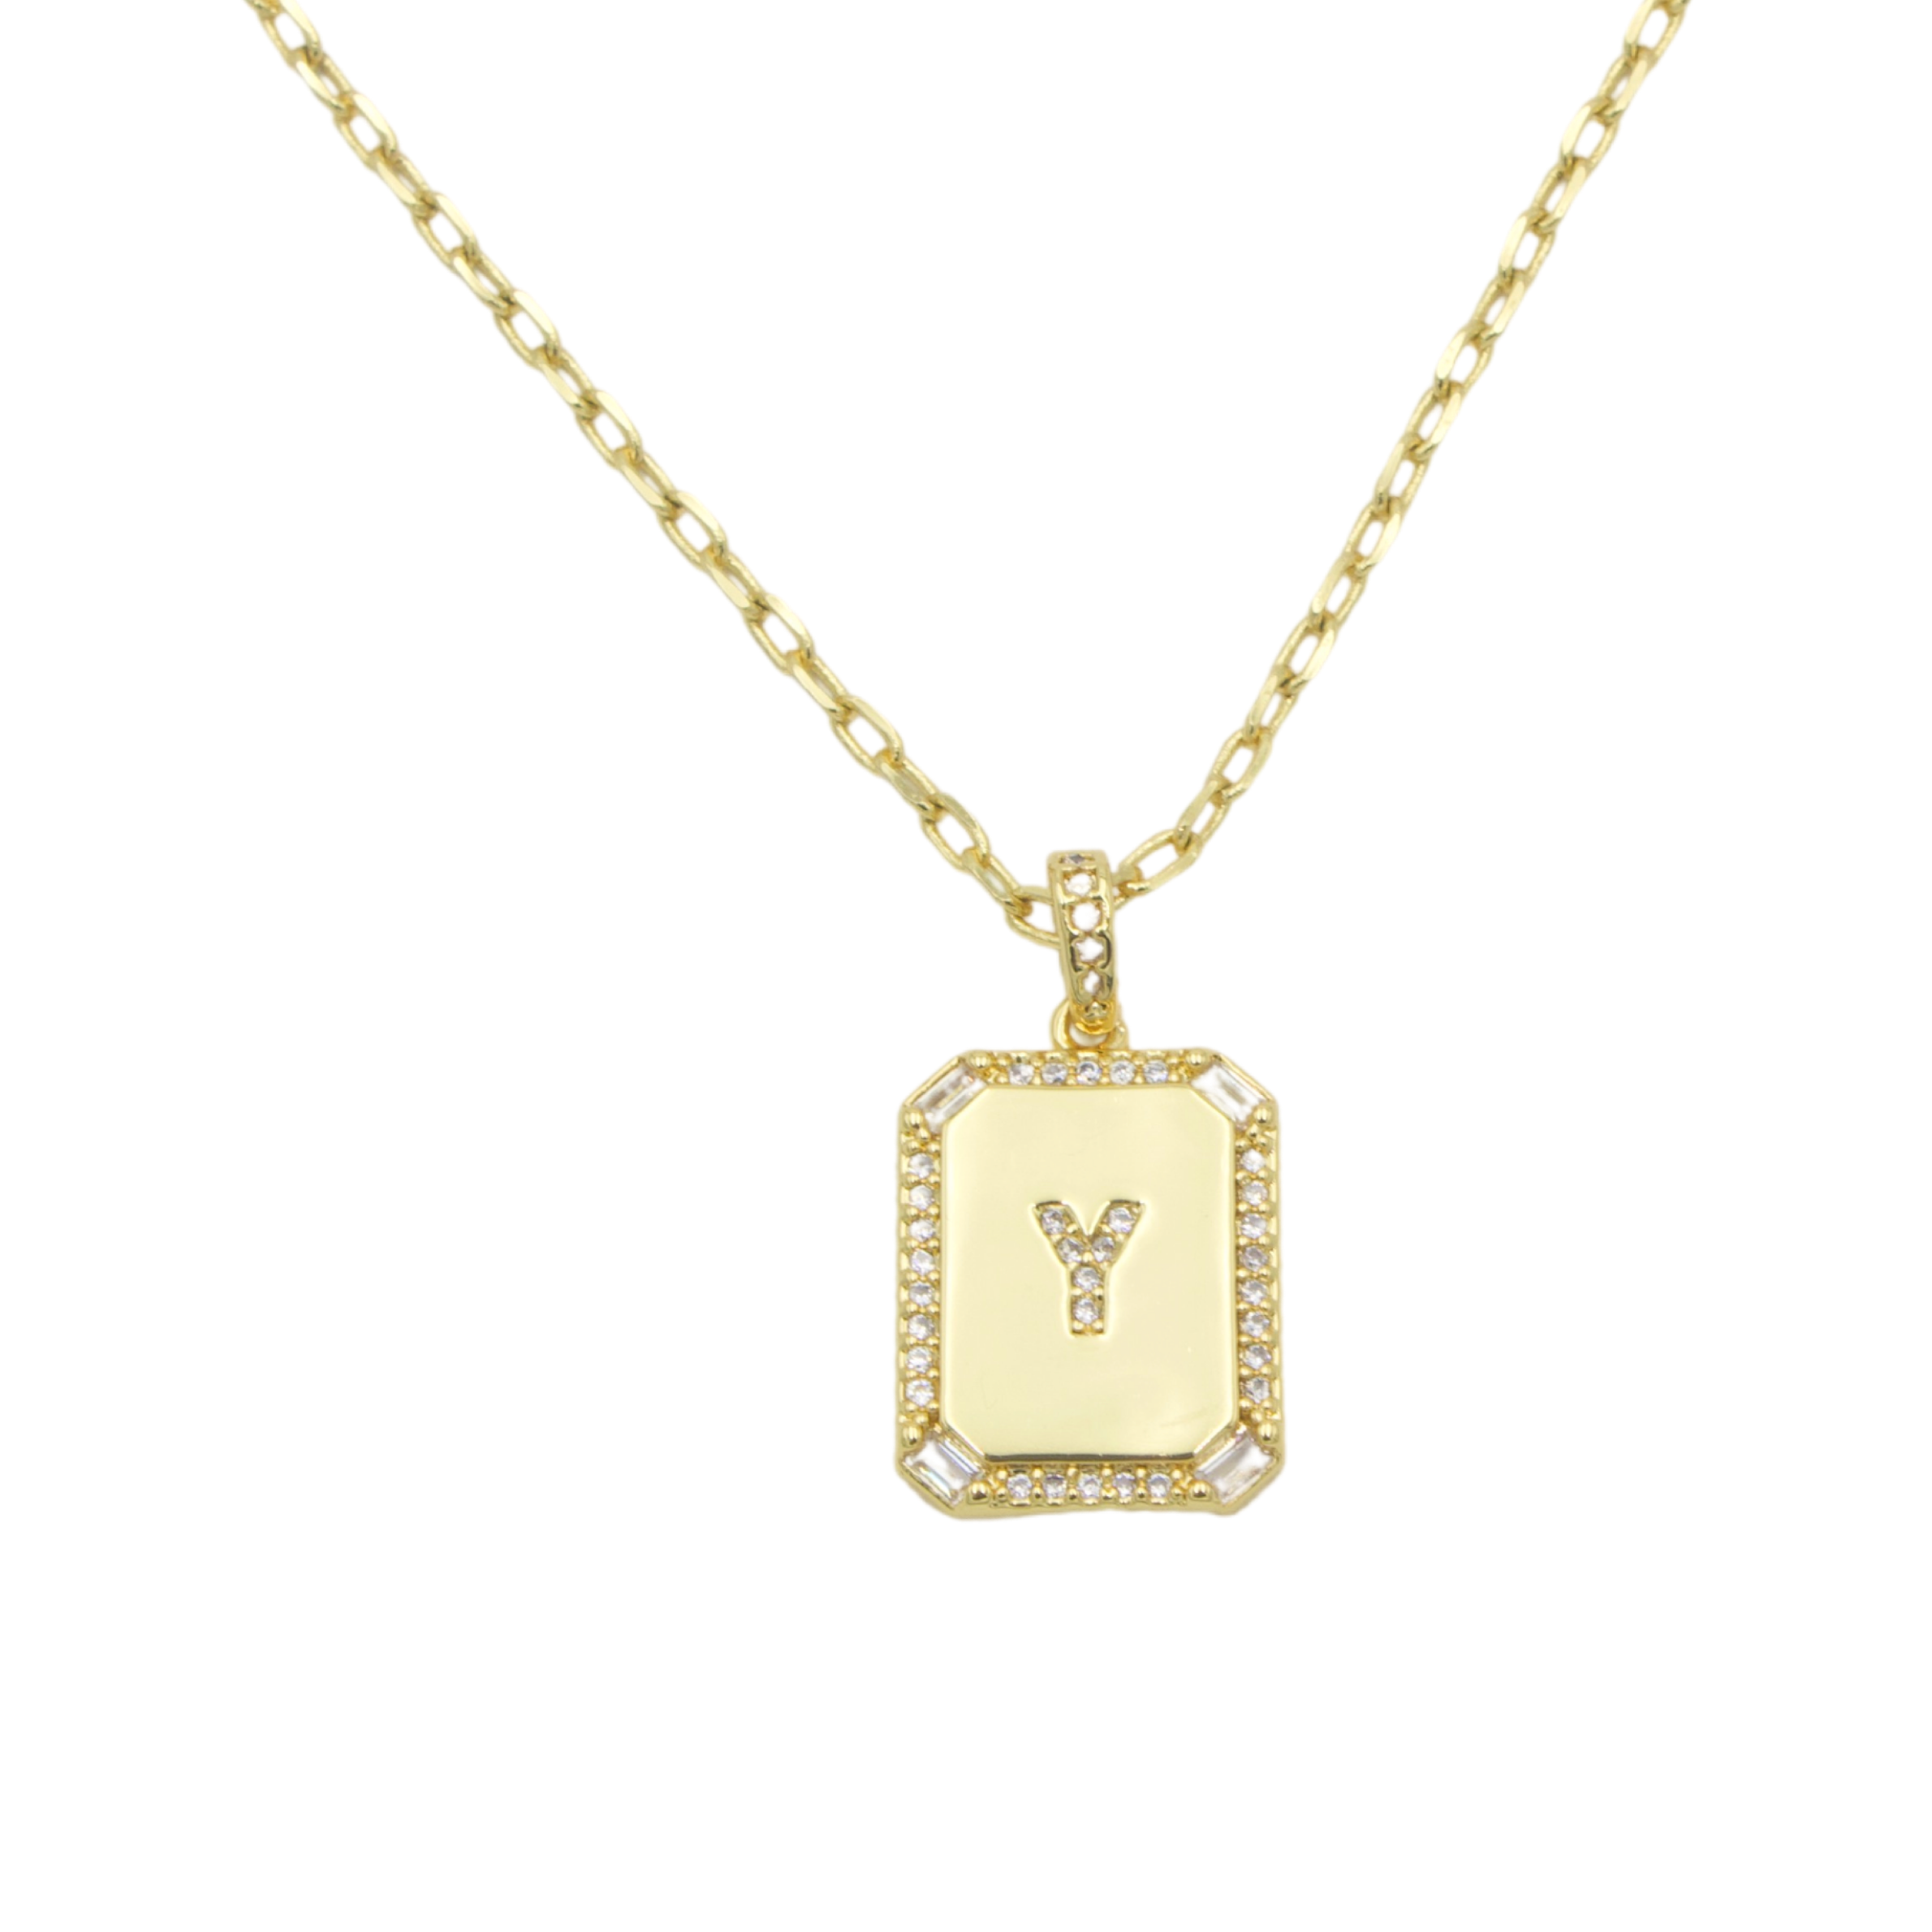 AW Boutique's gold filled 16 inch cable chain necklace finished with a dainty initial pendant with cubic zirconia detail. Y initial shown.